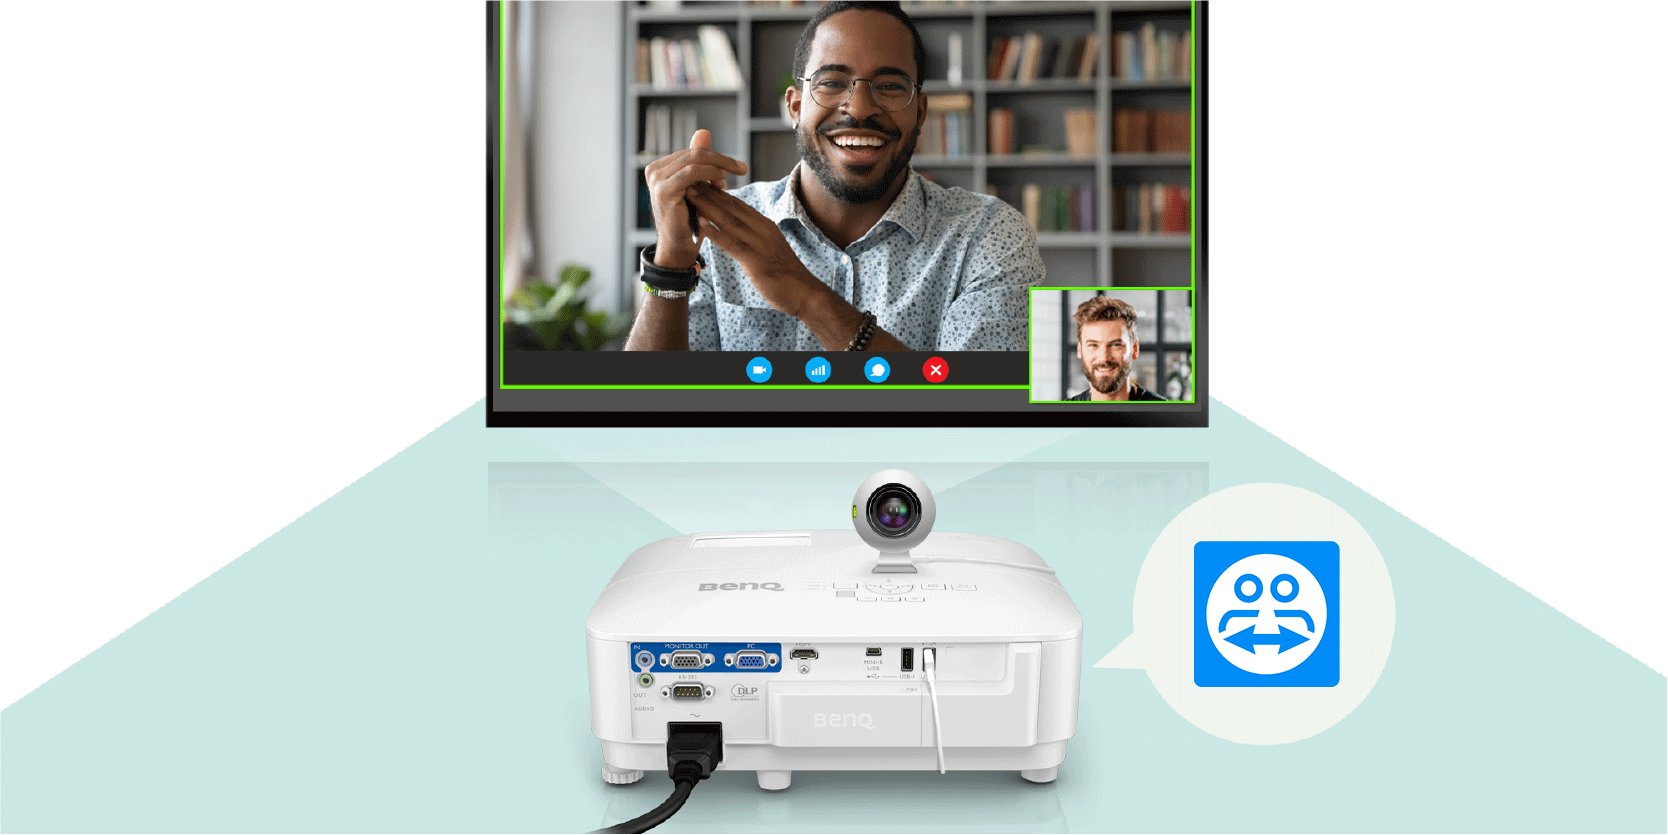 BenQ Smart Projector provides video conferencing app and internet connection,